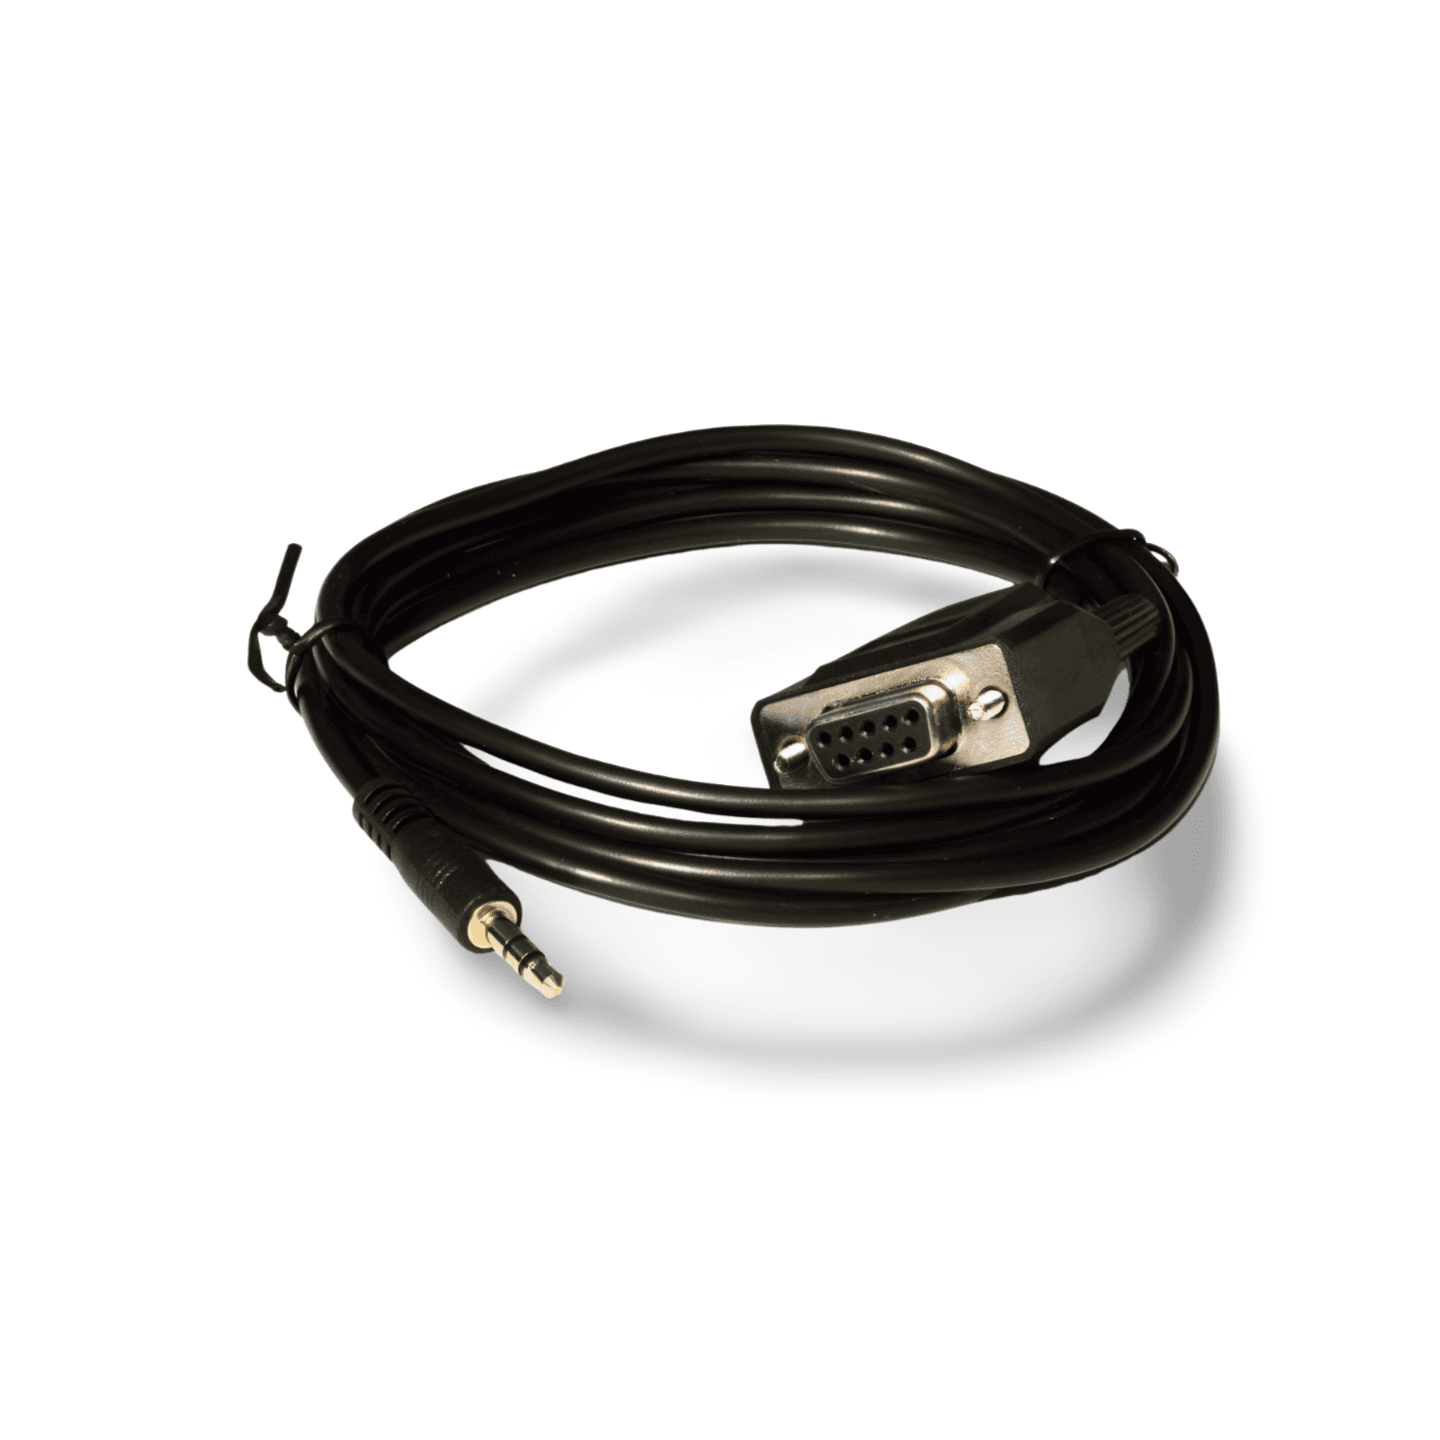 6ft DB9 Female to 3.5mm TRS Serial Cable black